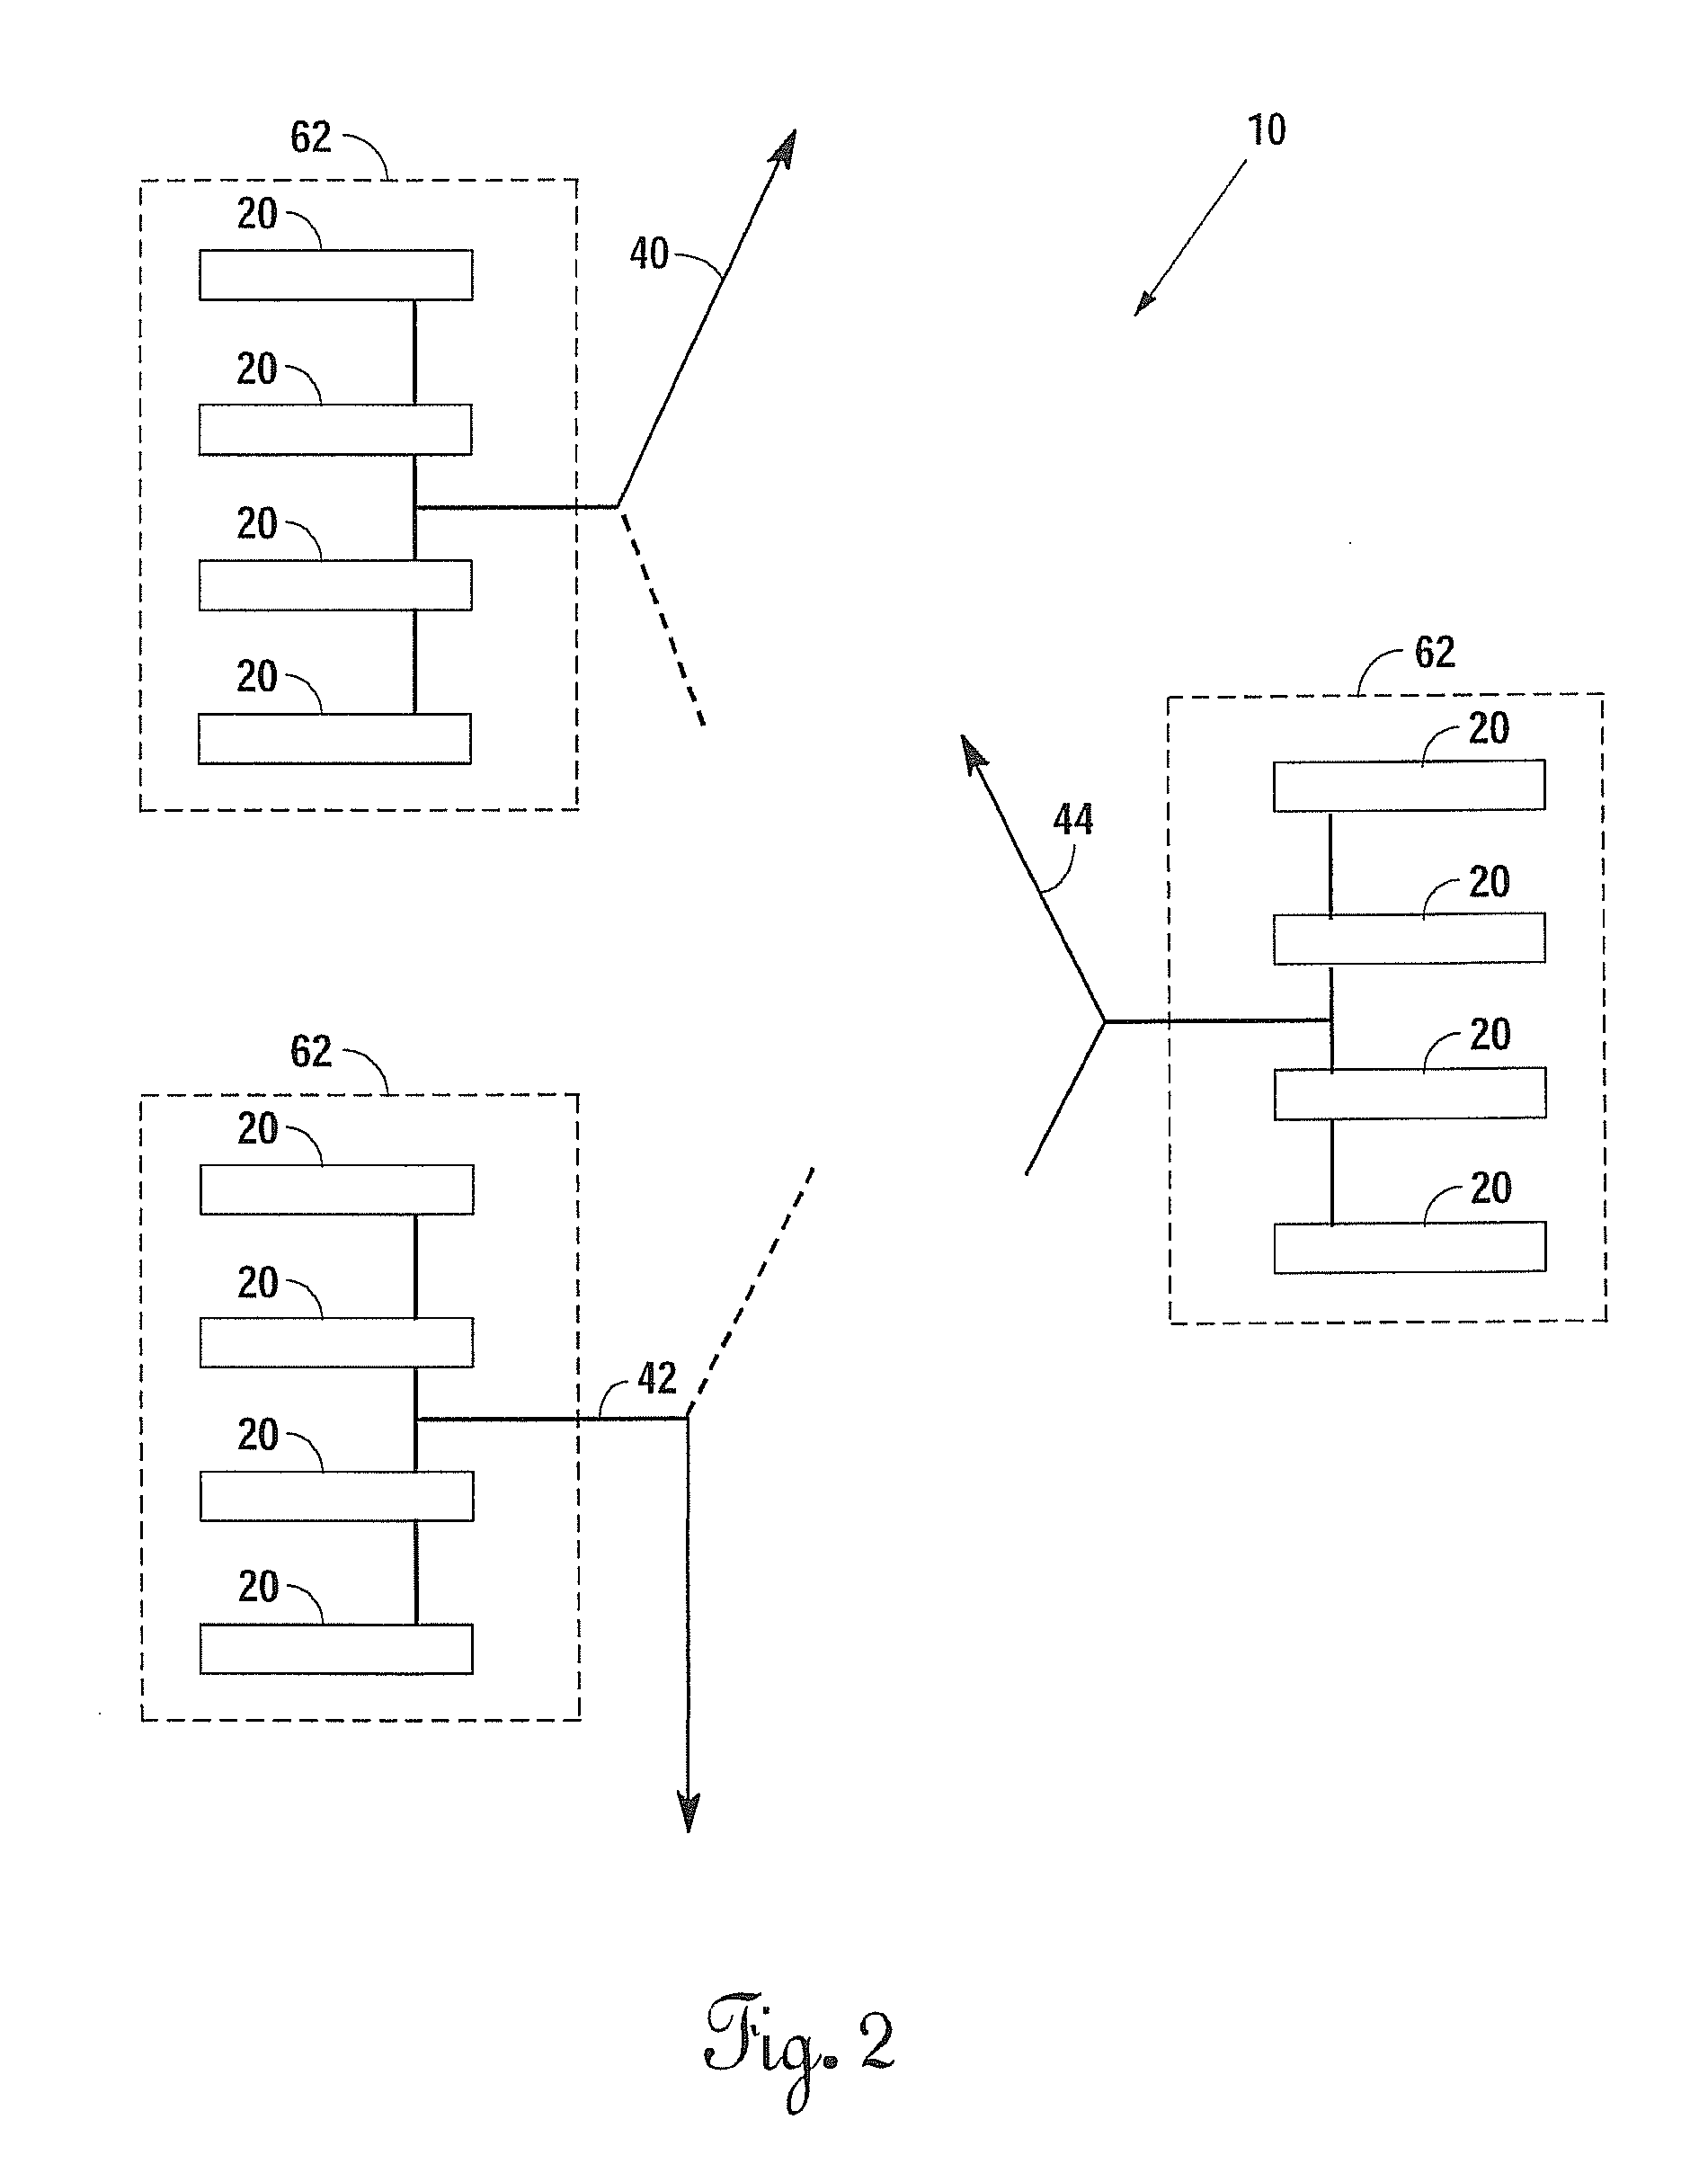 System and Method for Secure Offshore Storage of Crude Oil